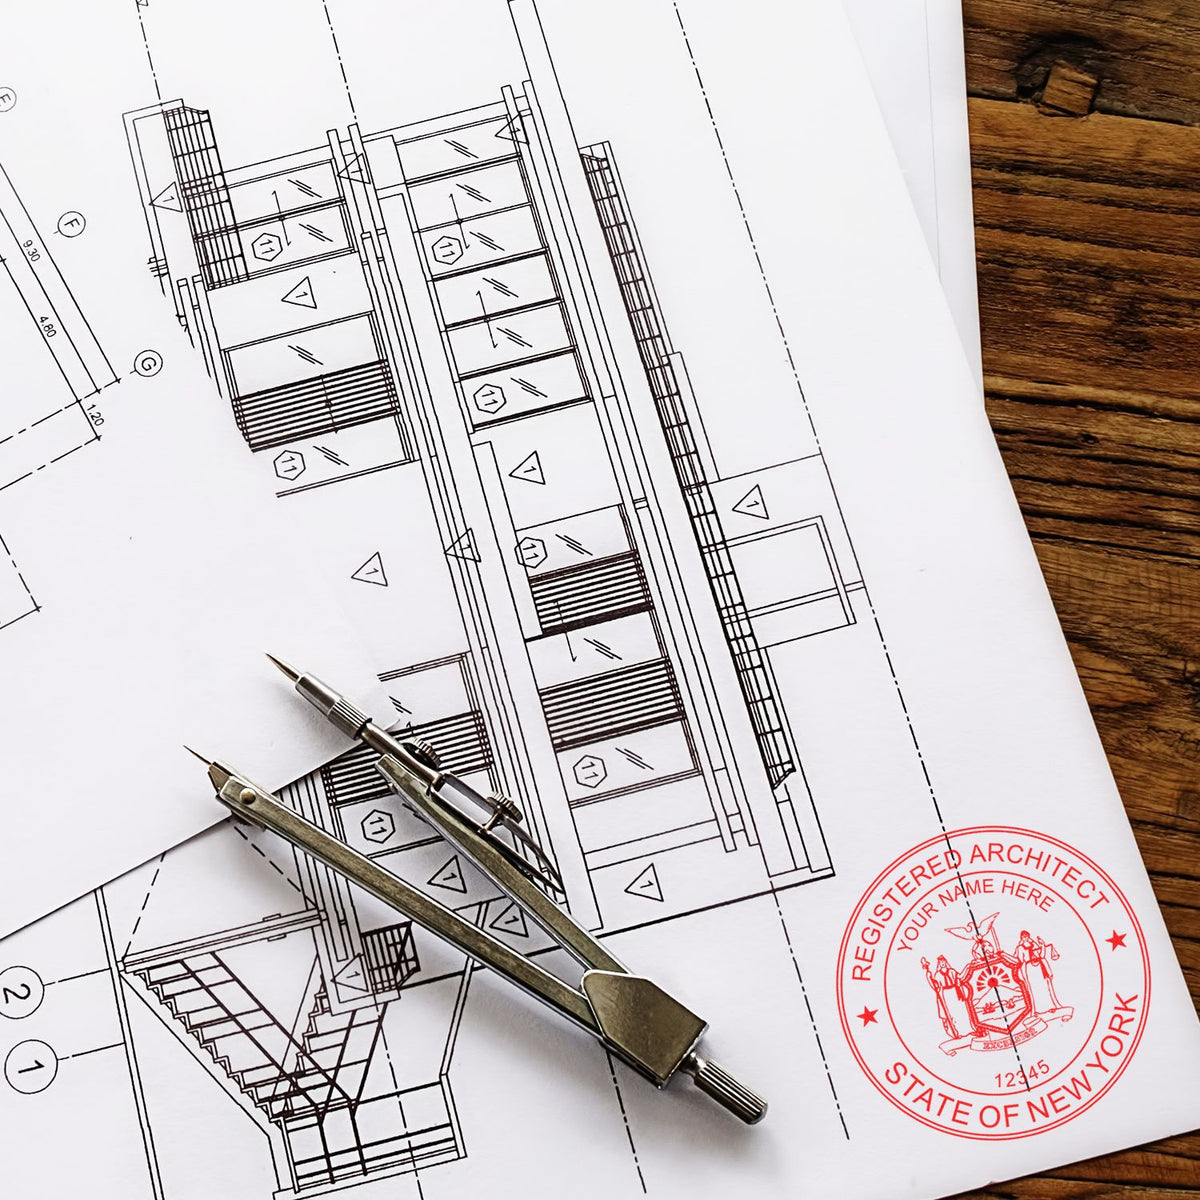 The Slim Pre-Inked New York Architect Seal Stamp stamp impression comes to life with a crisp, detailed photo on paper - showcasing true professional quality.